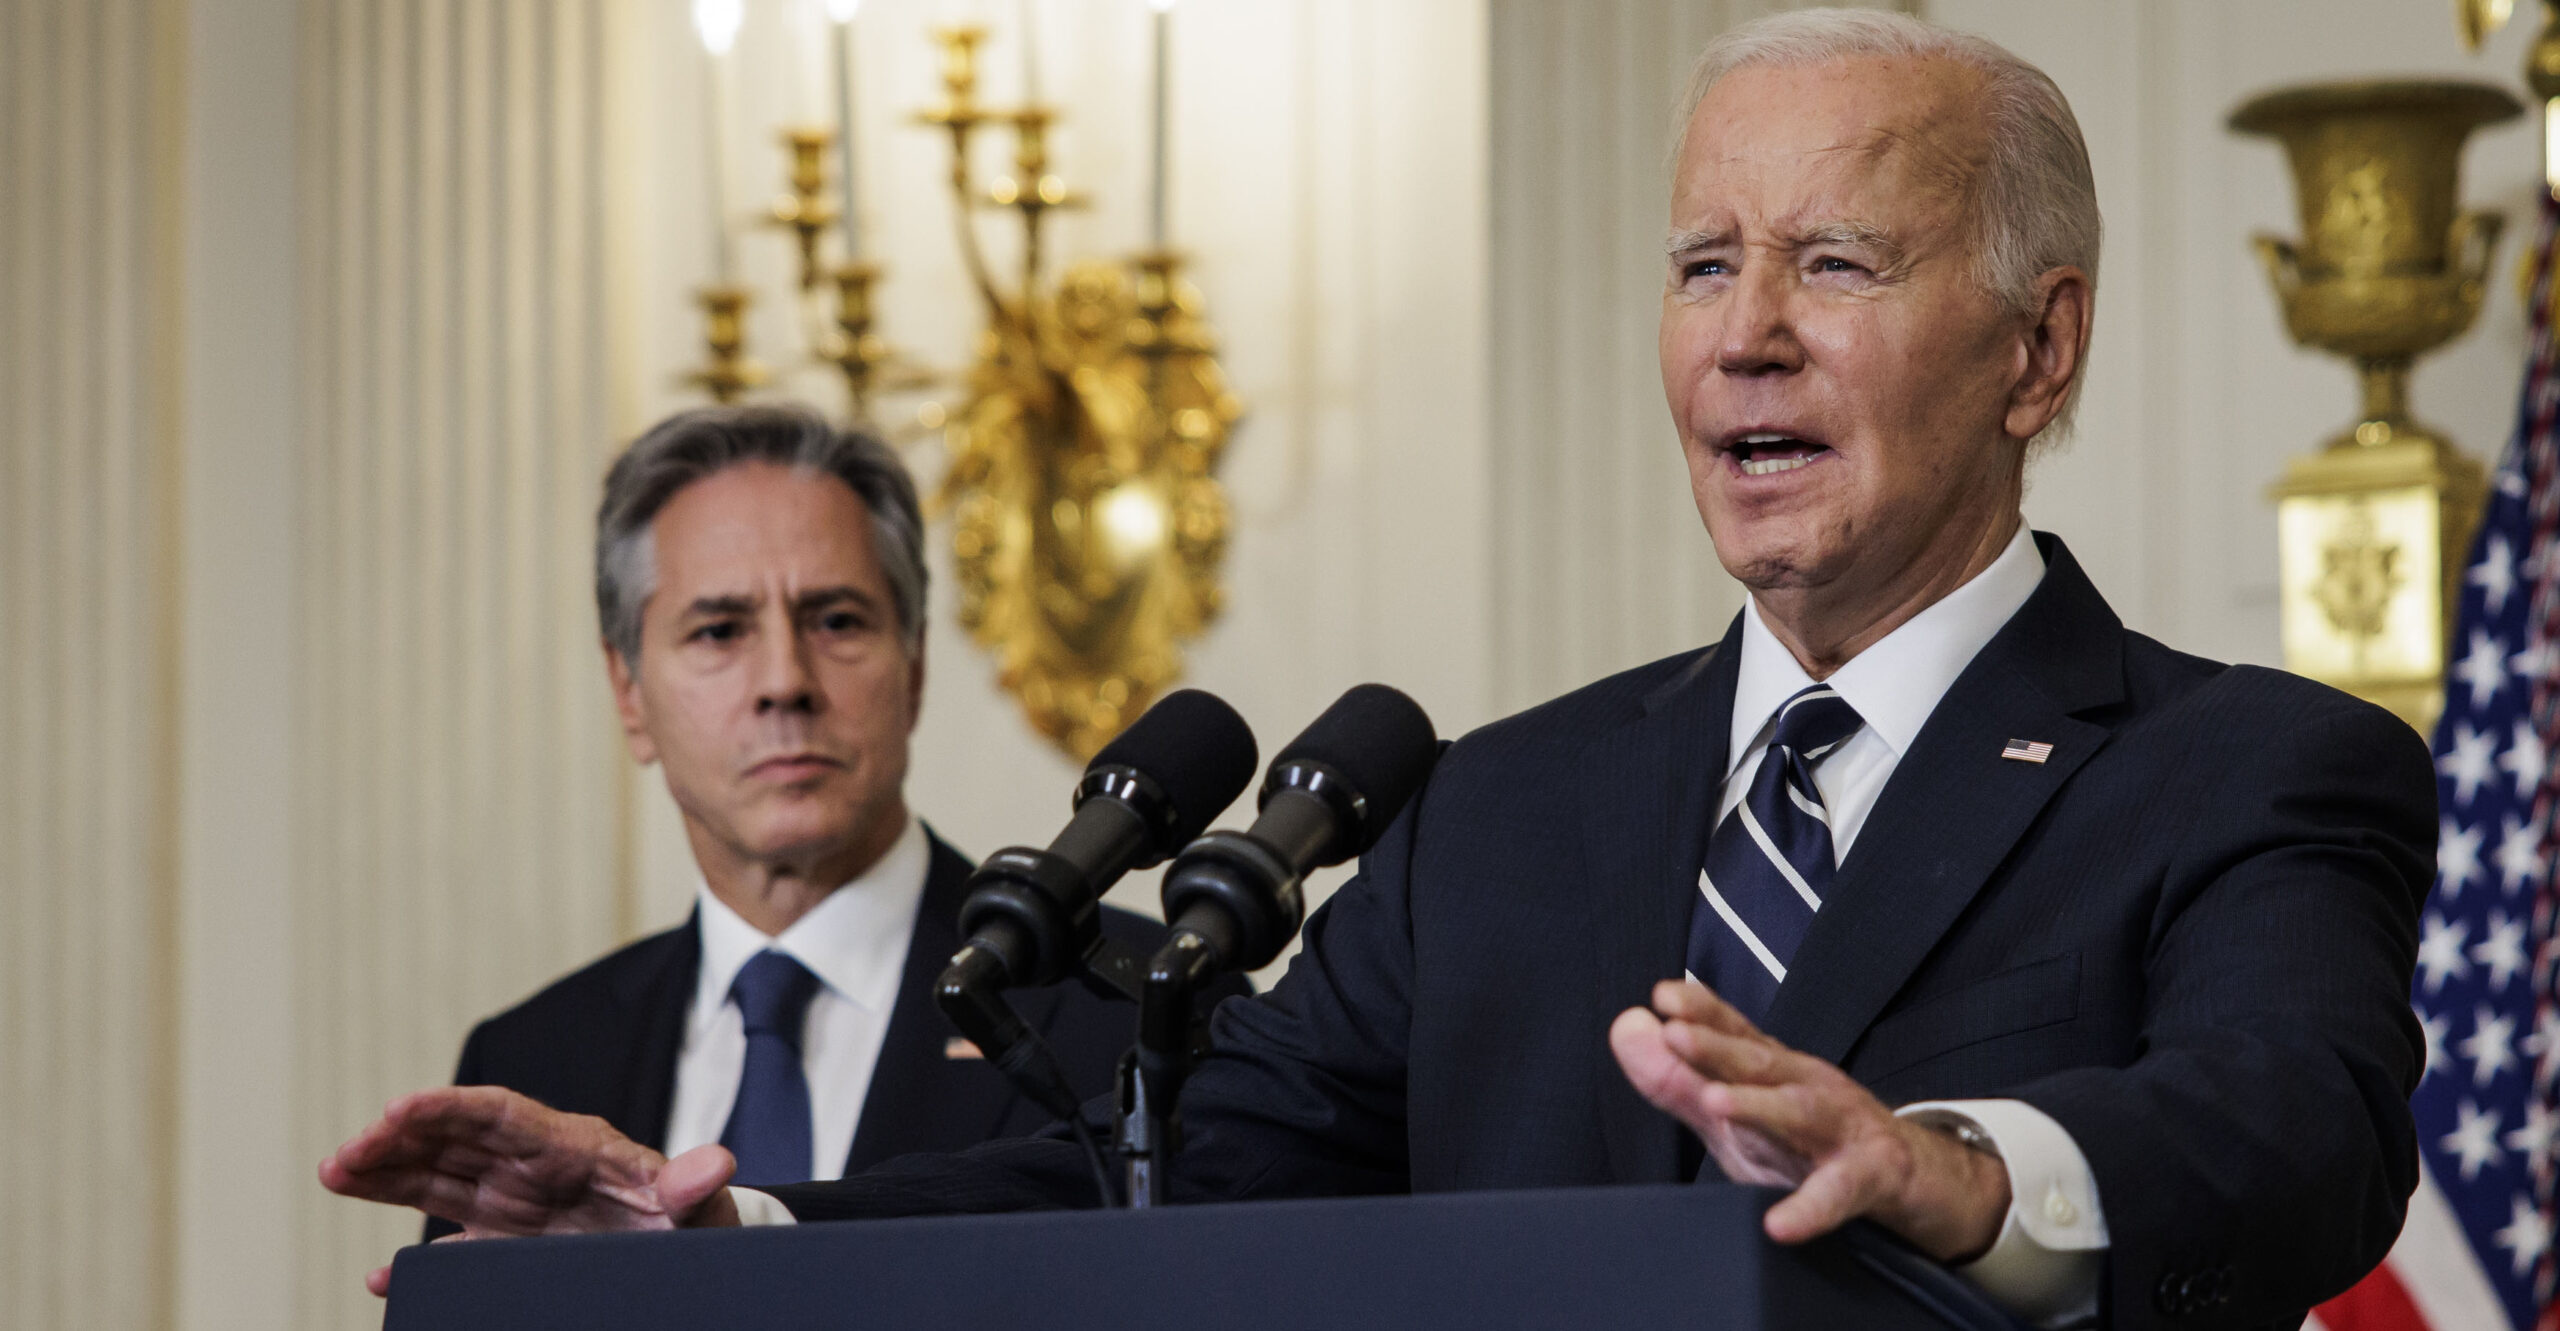 Christian, Pro-Life Groups Support Biden Program That Funnels Money to Abortion Groups Overseas